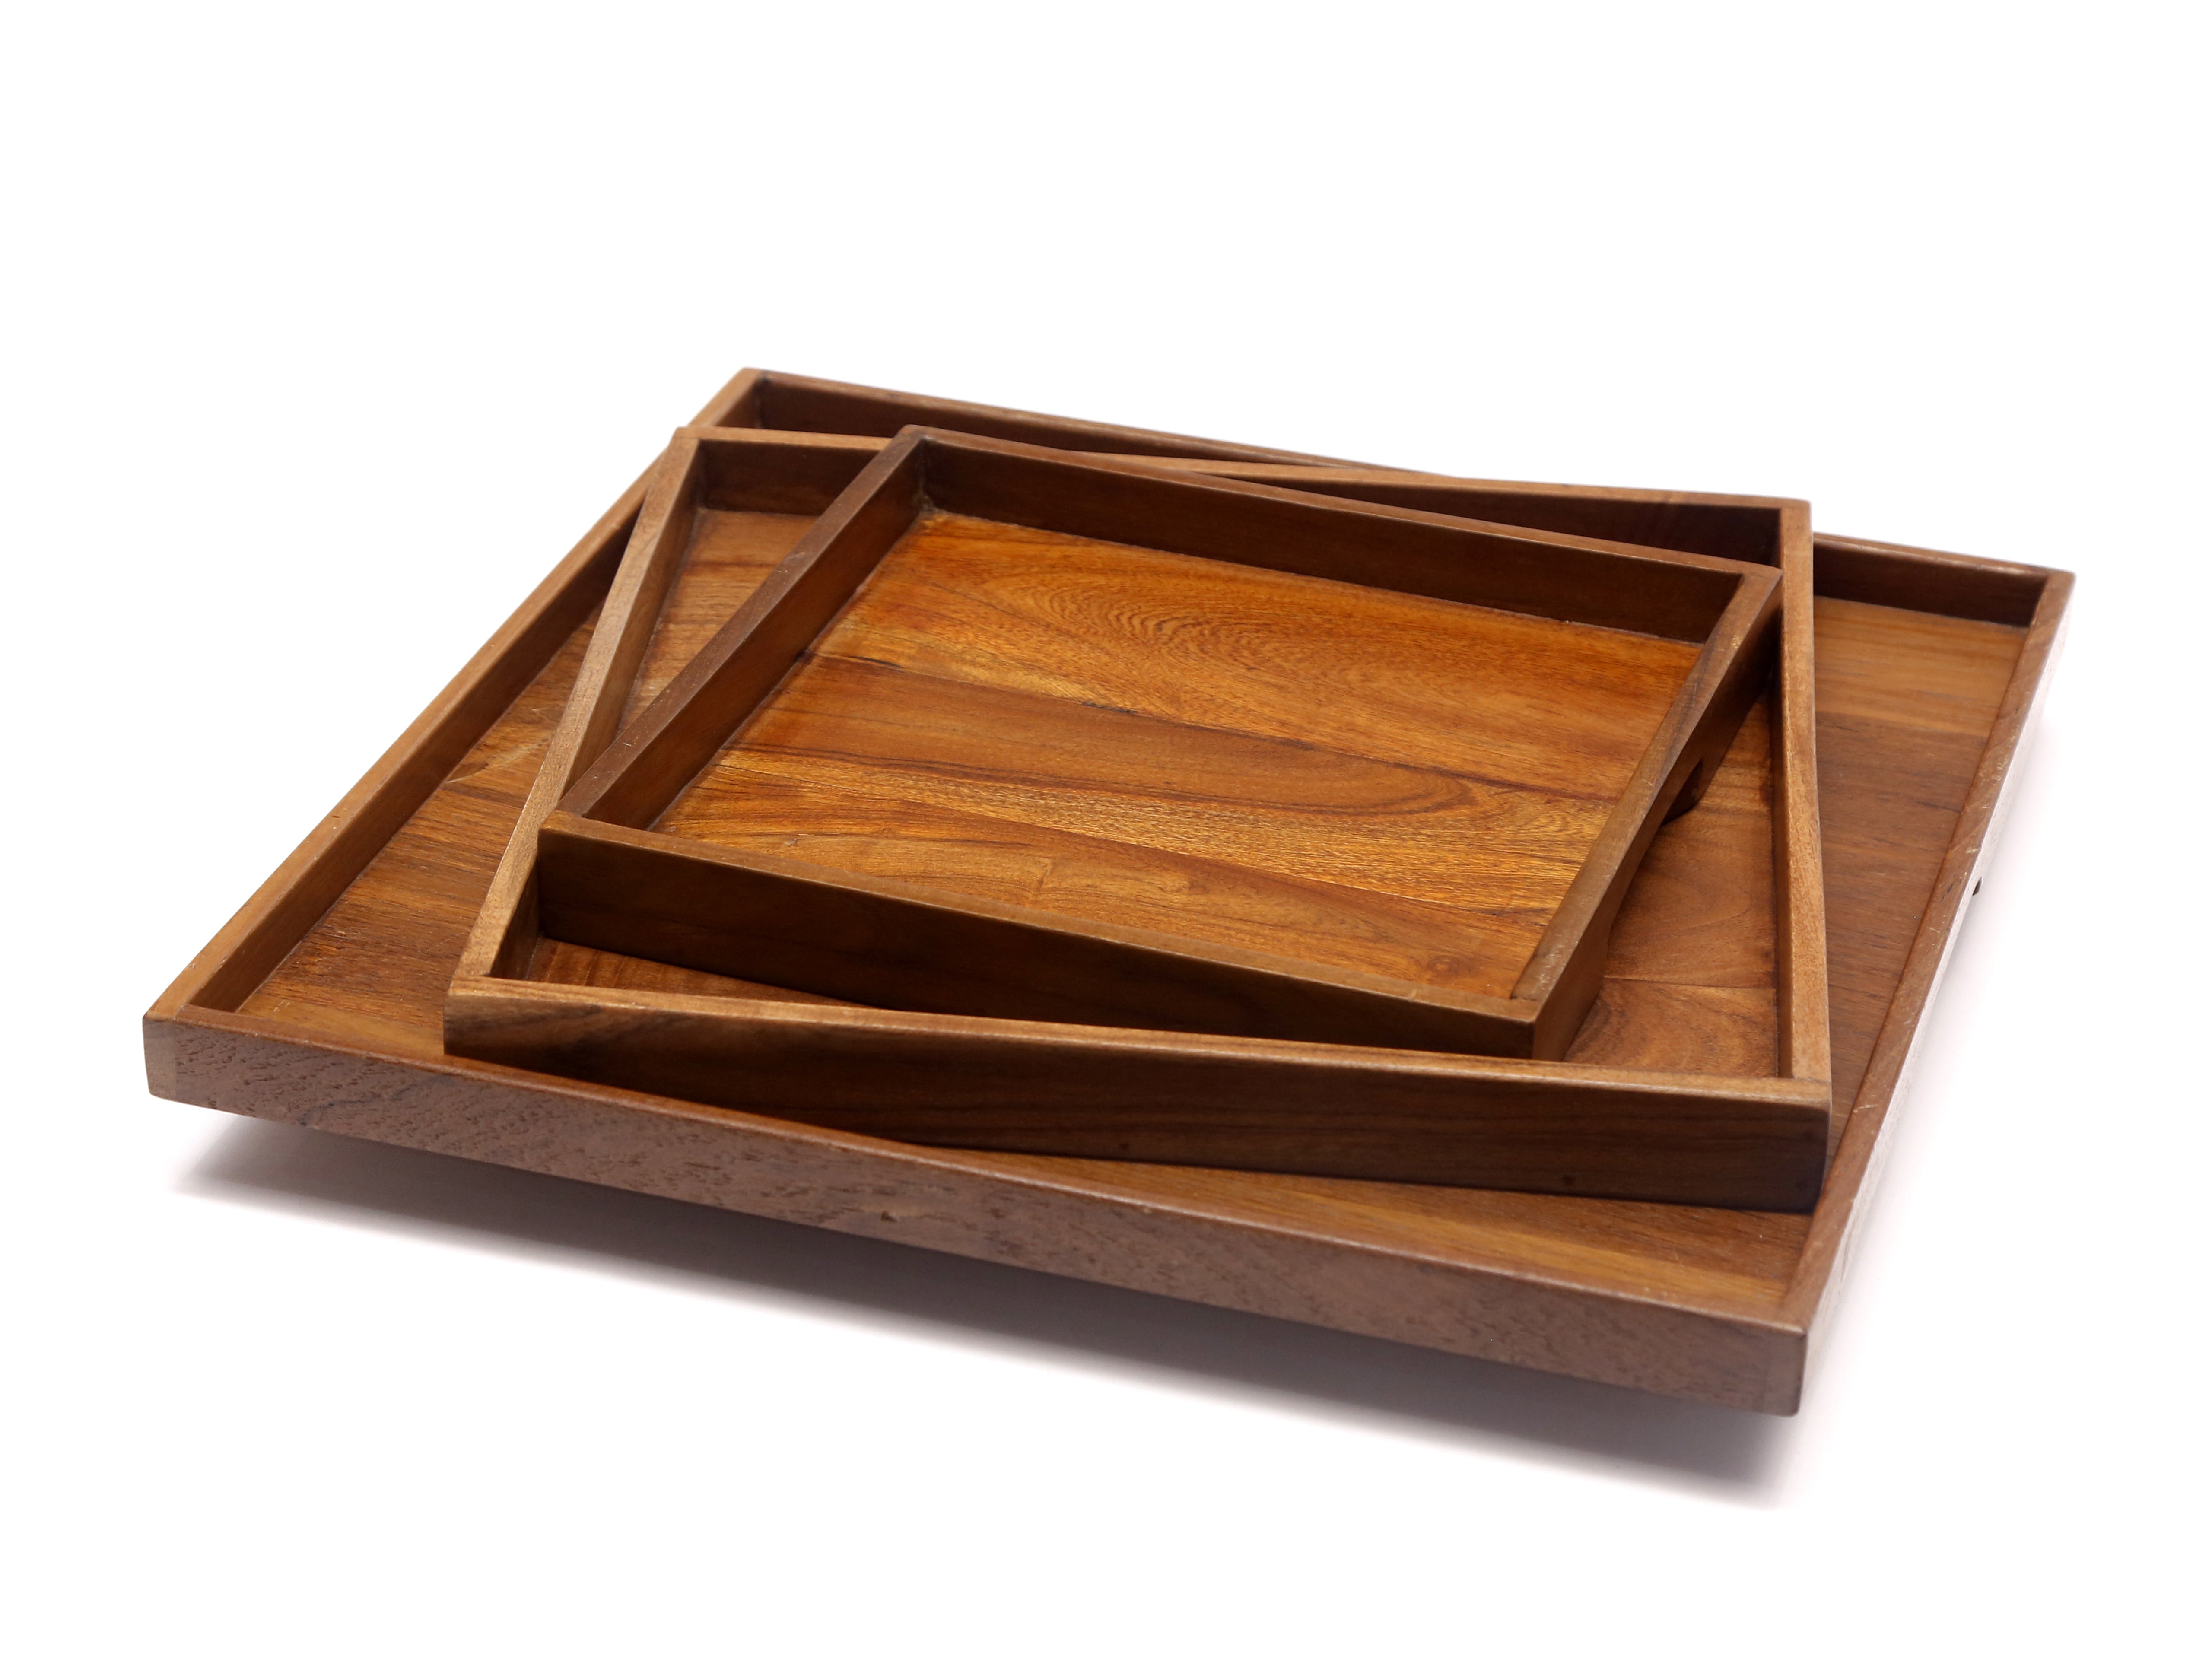 Solid Snack Small Tray Set - Set of 3 Tray